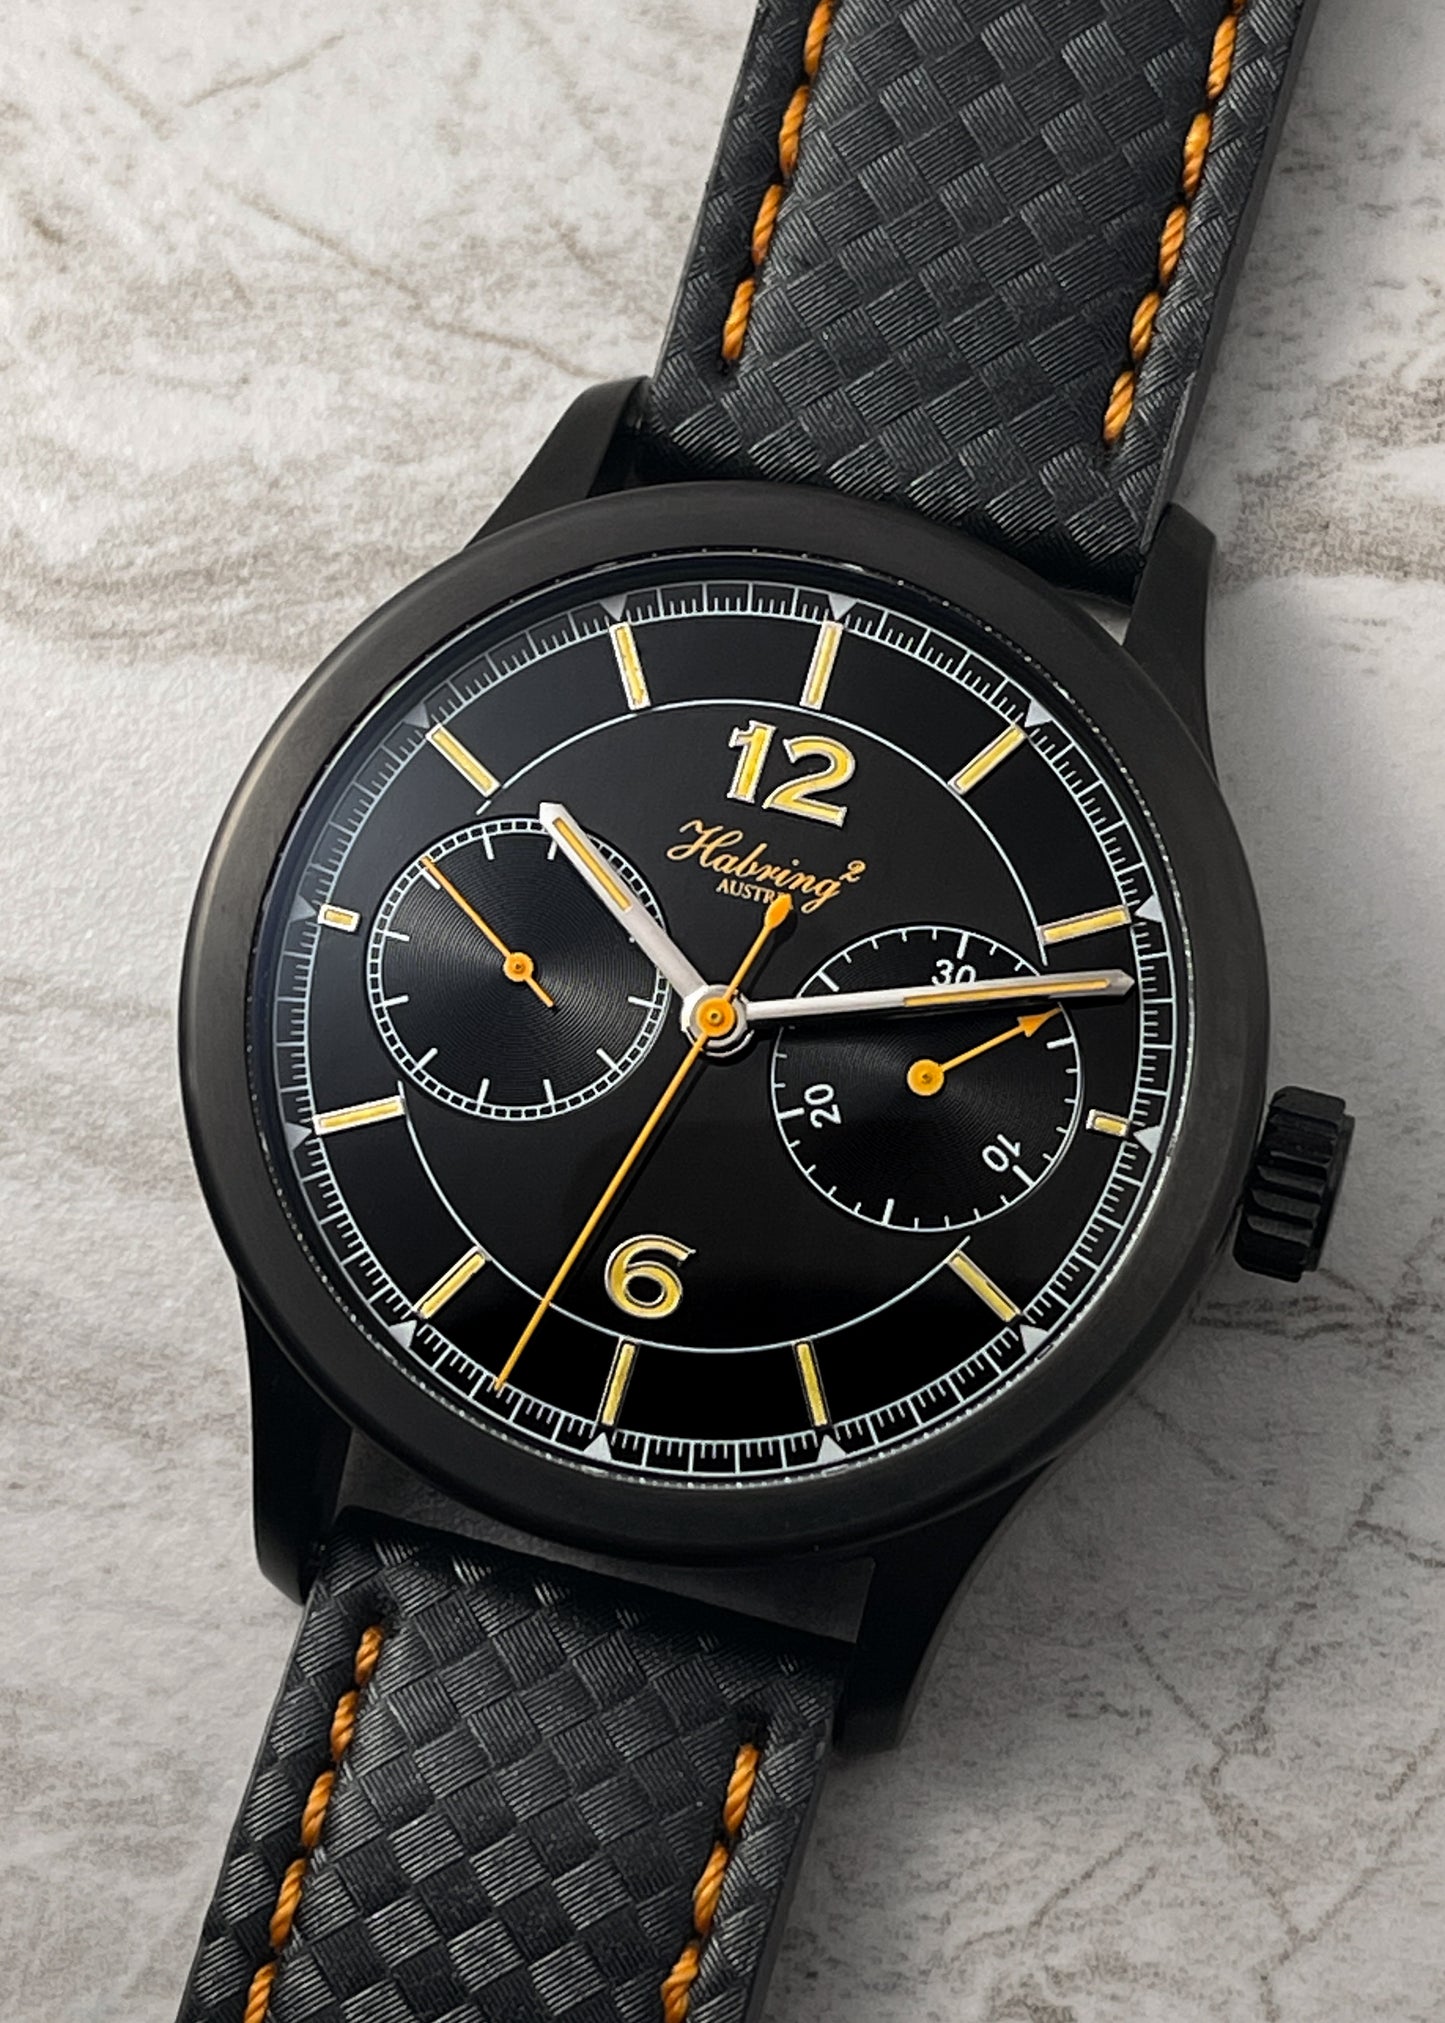 Habring² COS Chronograph DLC Special Edition #8-2010 (Pre-Owned)